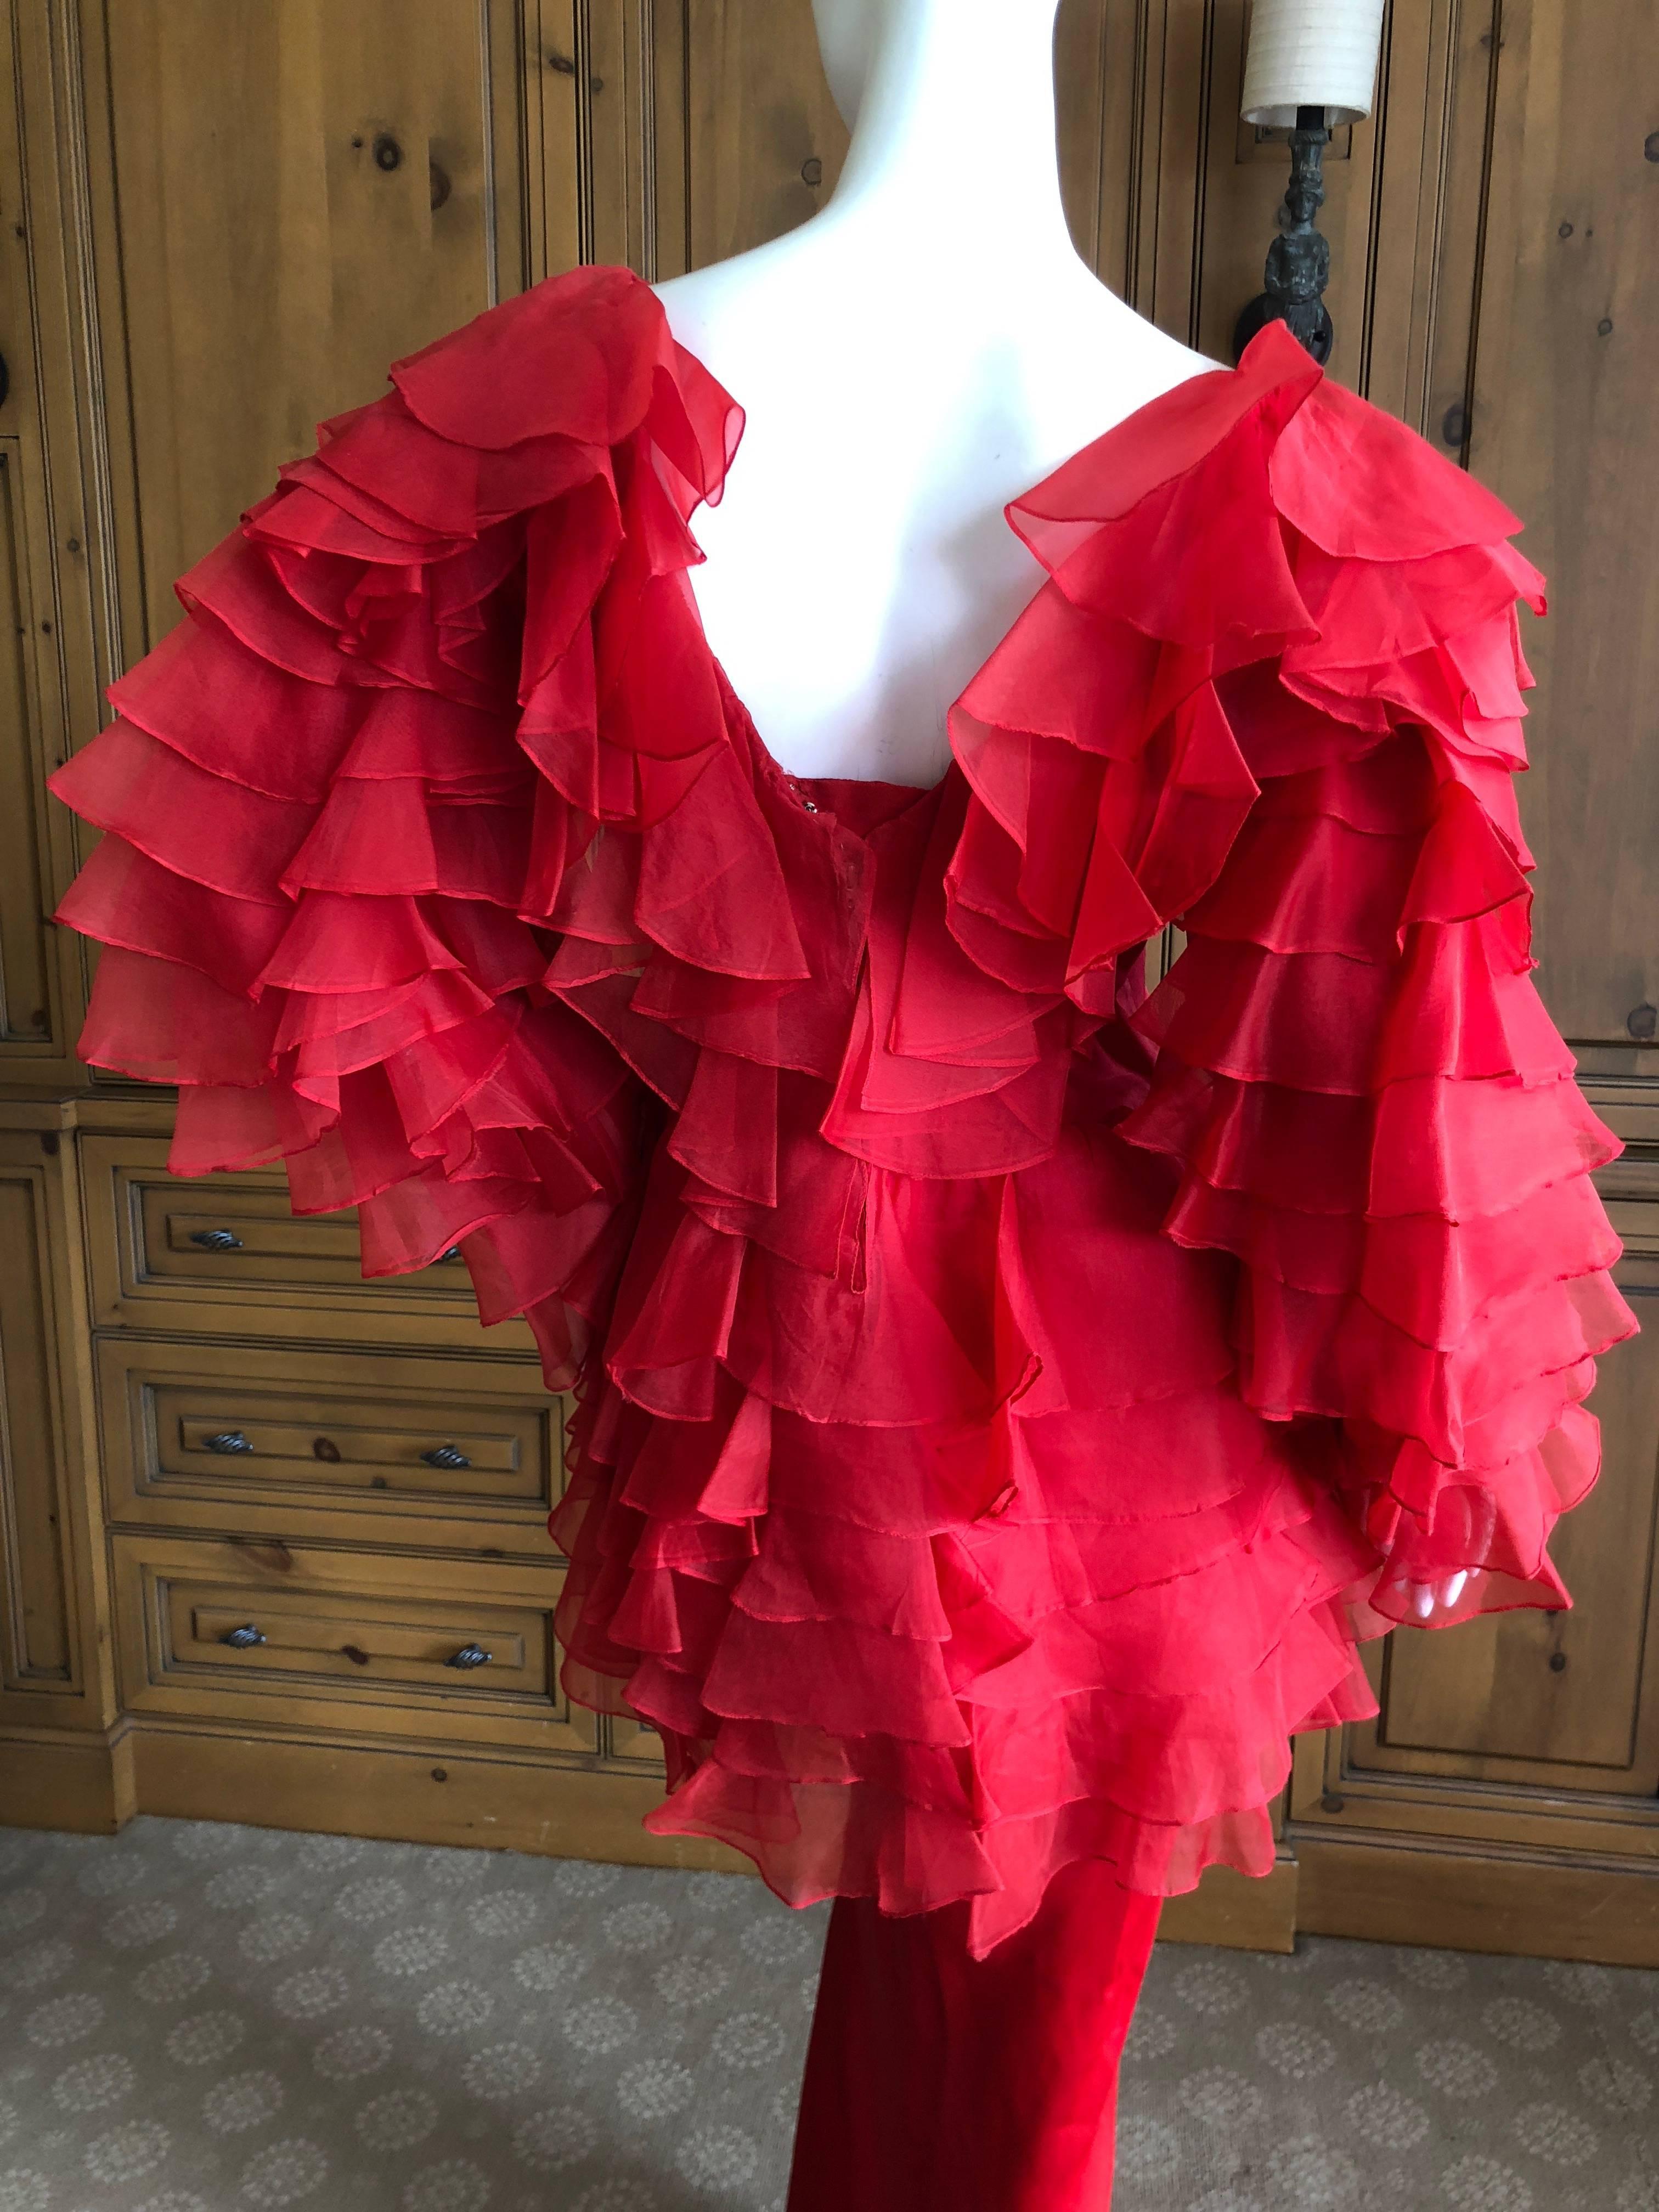 Cardinali 1970s Scarlet Red Ruffled Top and Bias Cut Silk Skirt with Fascinator For Sale 4